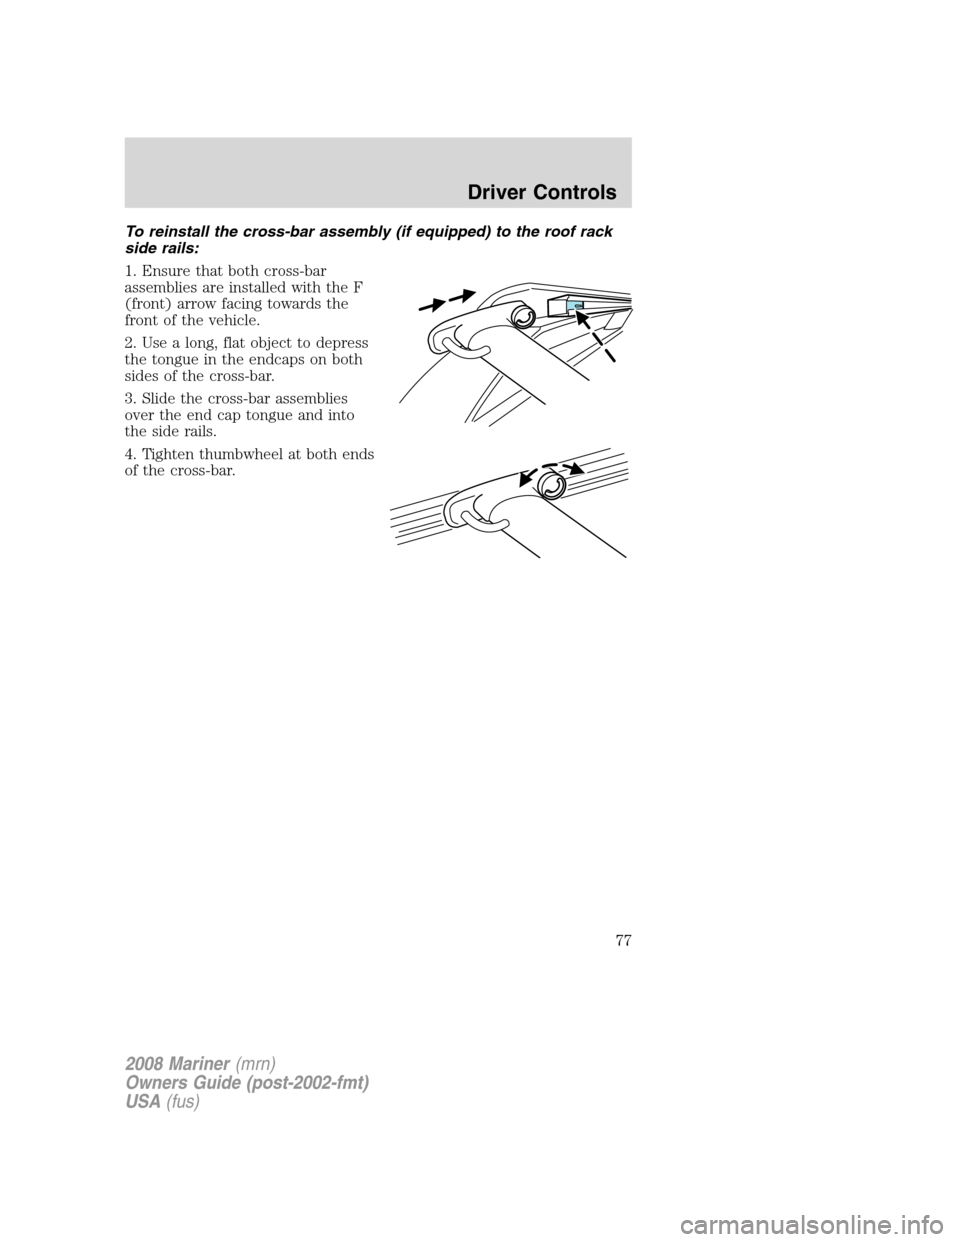 Mercury Mariner 2008  Owners Manuals To reinstall the cross-bar assembly (if equipped) to the roof rack
side rails:
1. Ensure that both cross-bar
assemblies are installed with the F
(front) arrow facing towards the
front of the vehicle.
